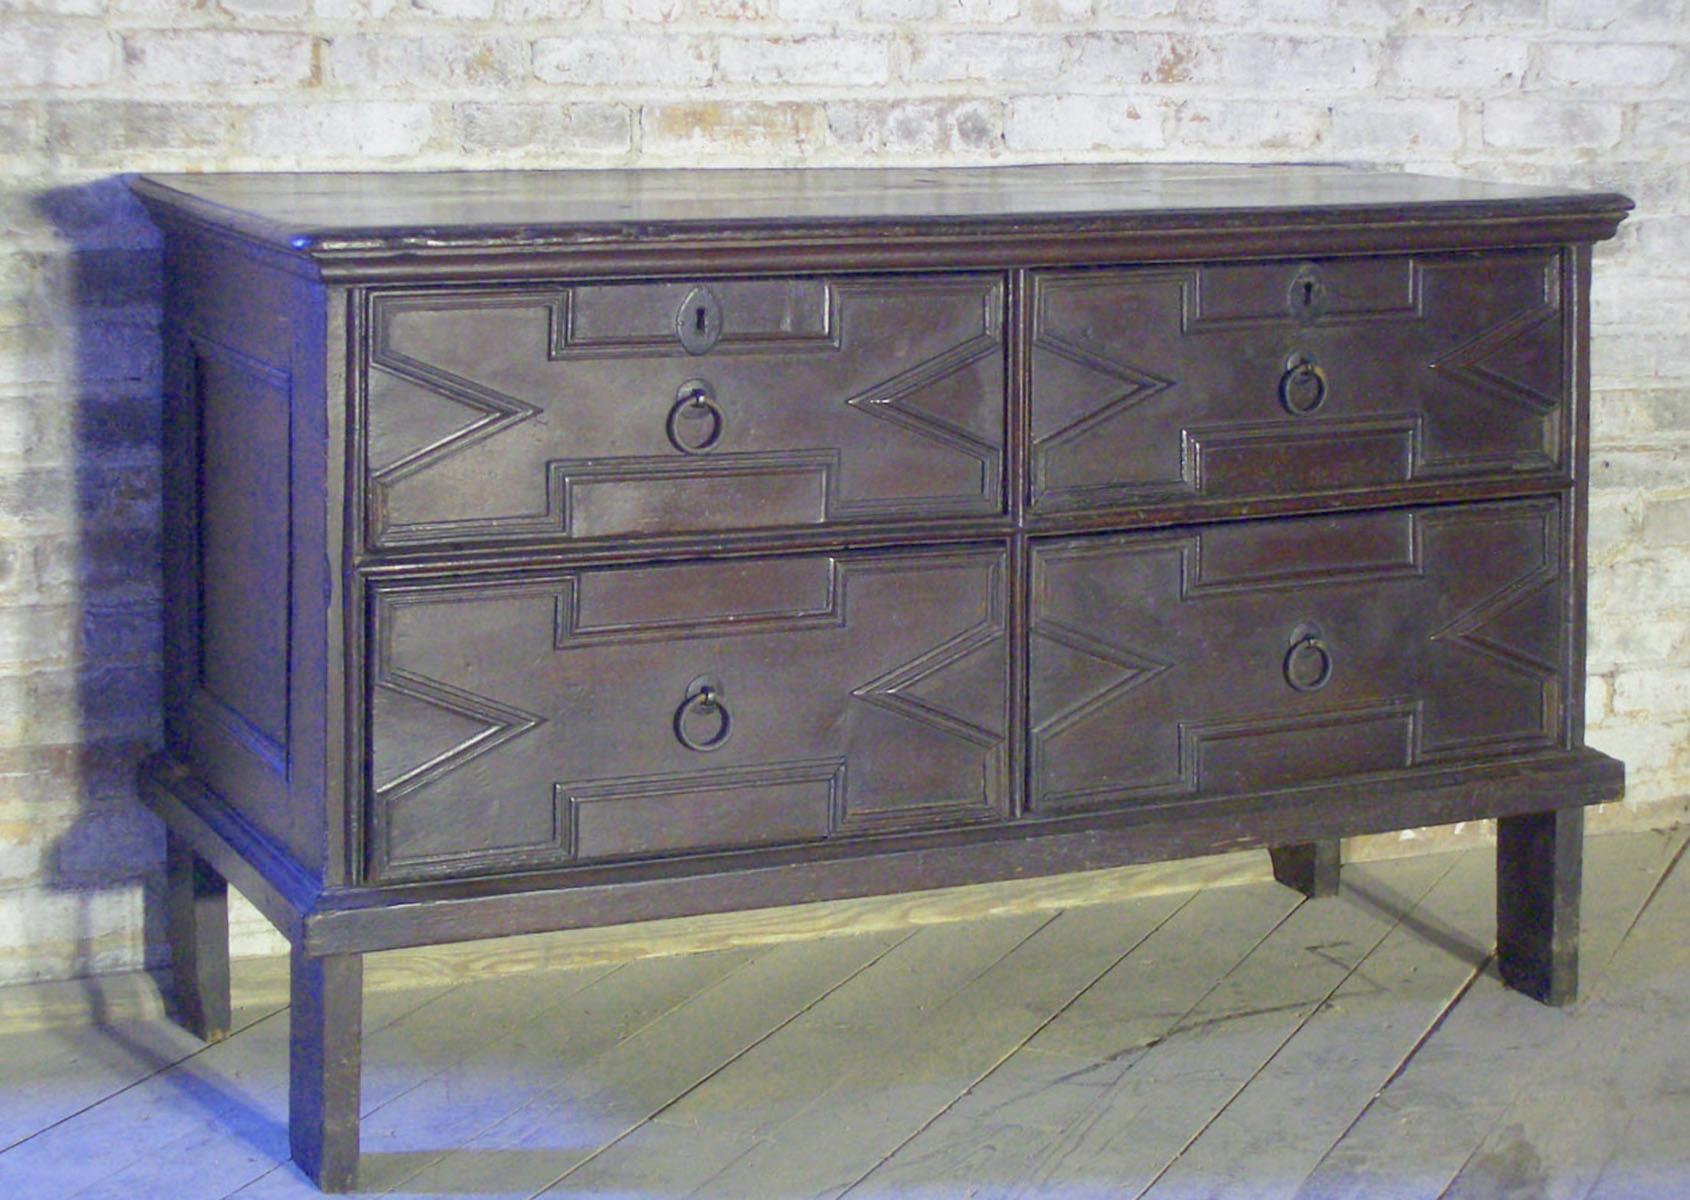 Large and unusual Jacobean commode, the dark stained oak and the elongated body on tall legs give it an elegant streamlined appearance. Four drawers with geometrically molded fronts and simple ring-pulls add to the understated, architectural look.